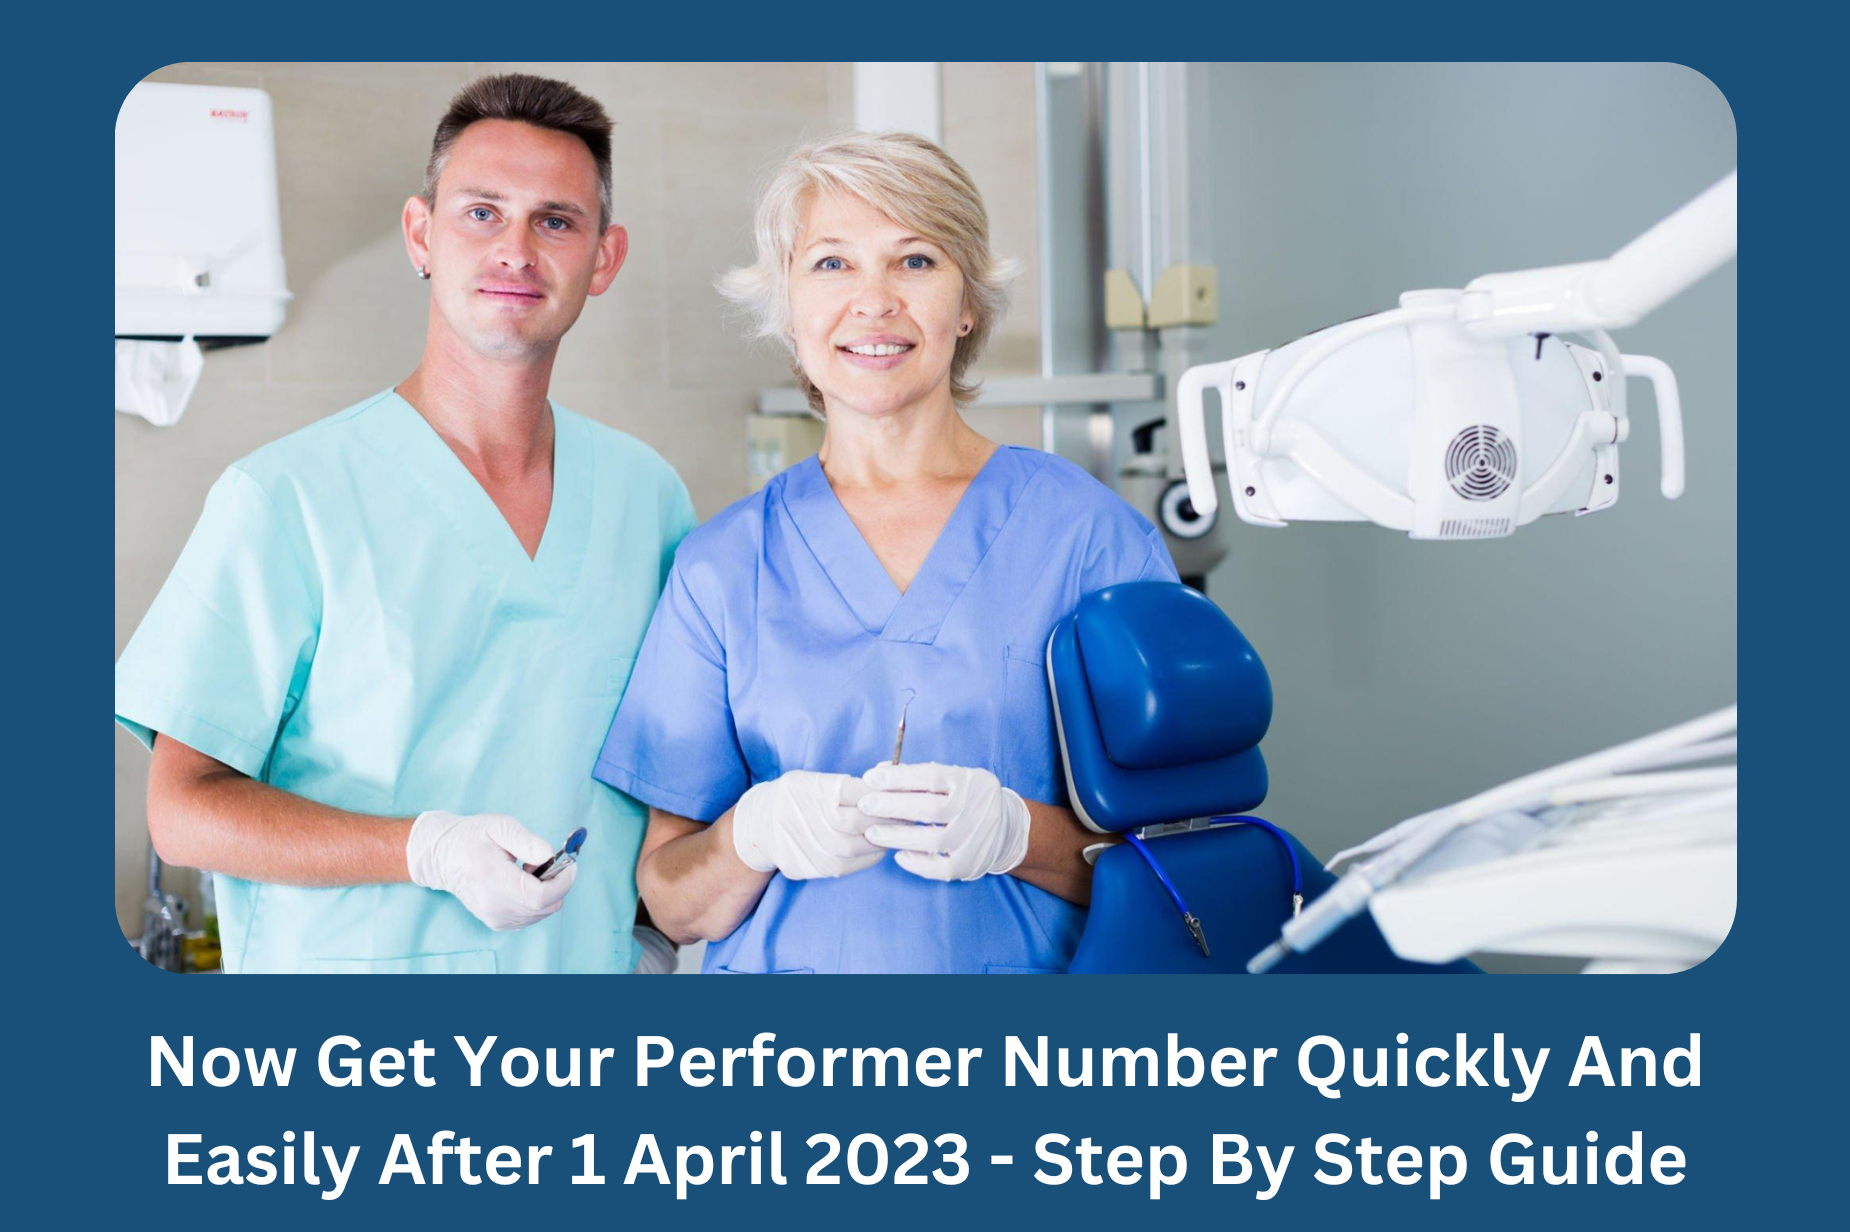 Now Get Your Performer Number Quickly And Easily After 1 April 2023 – Step By Step Guide